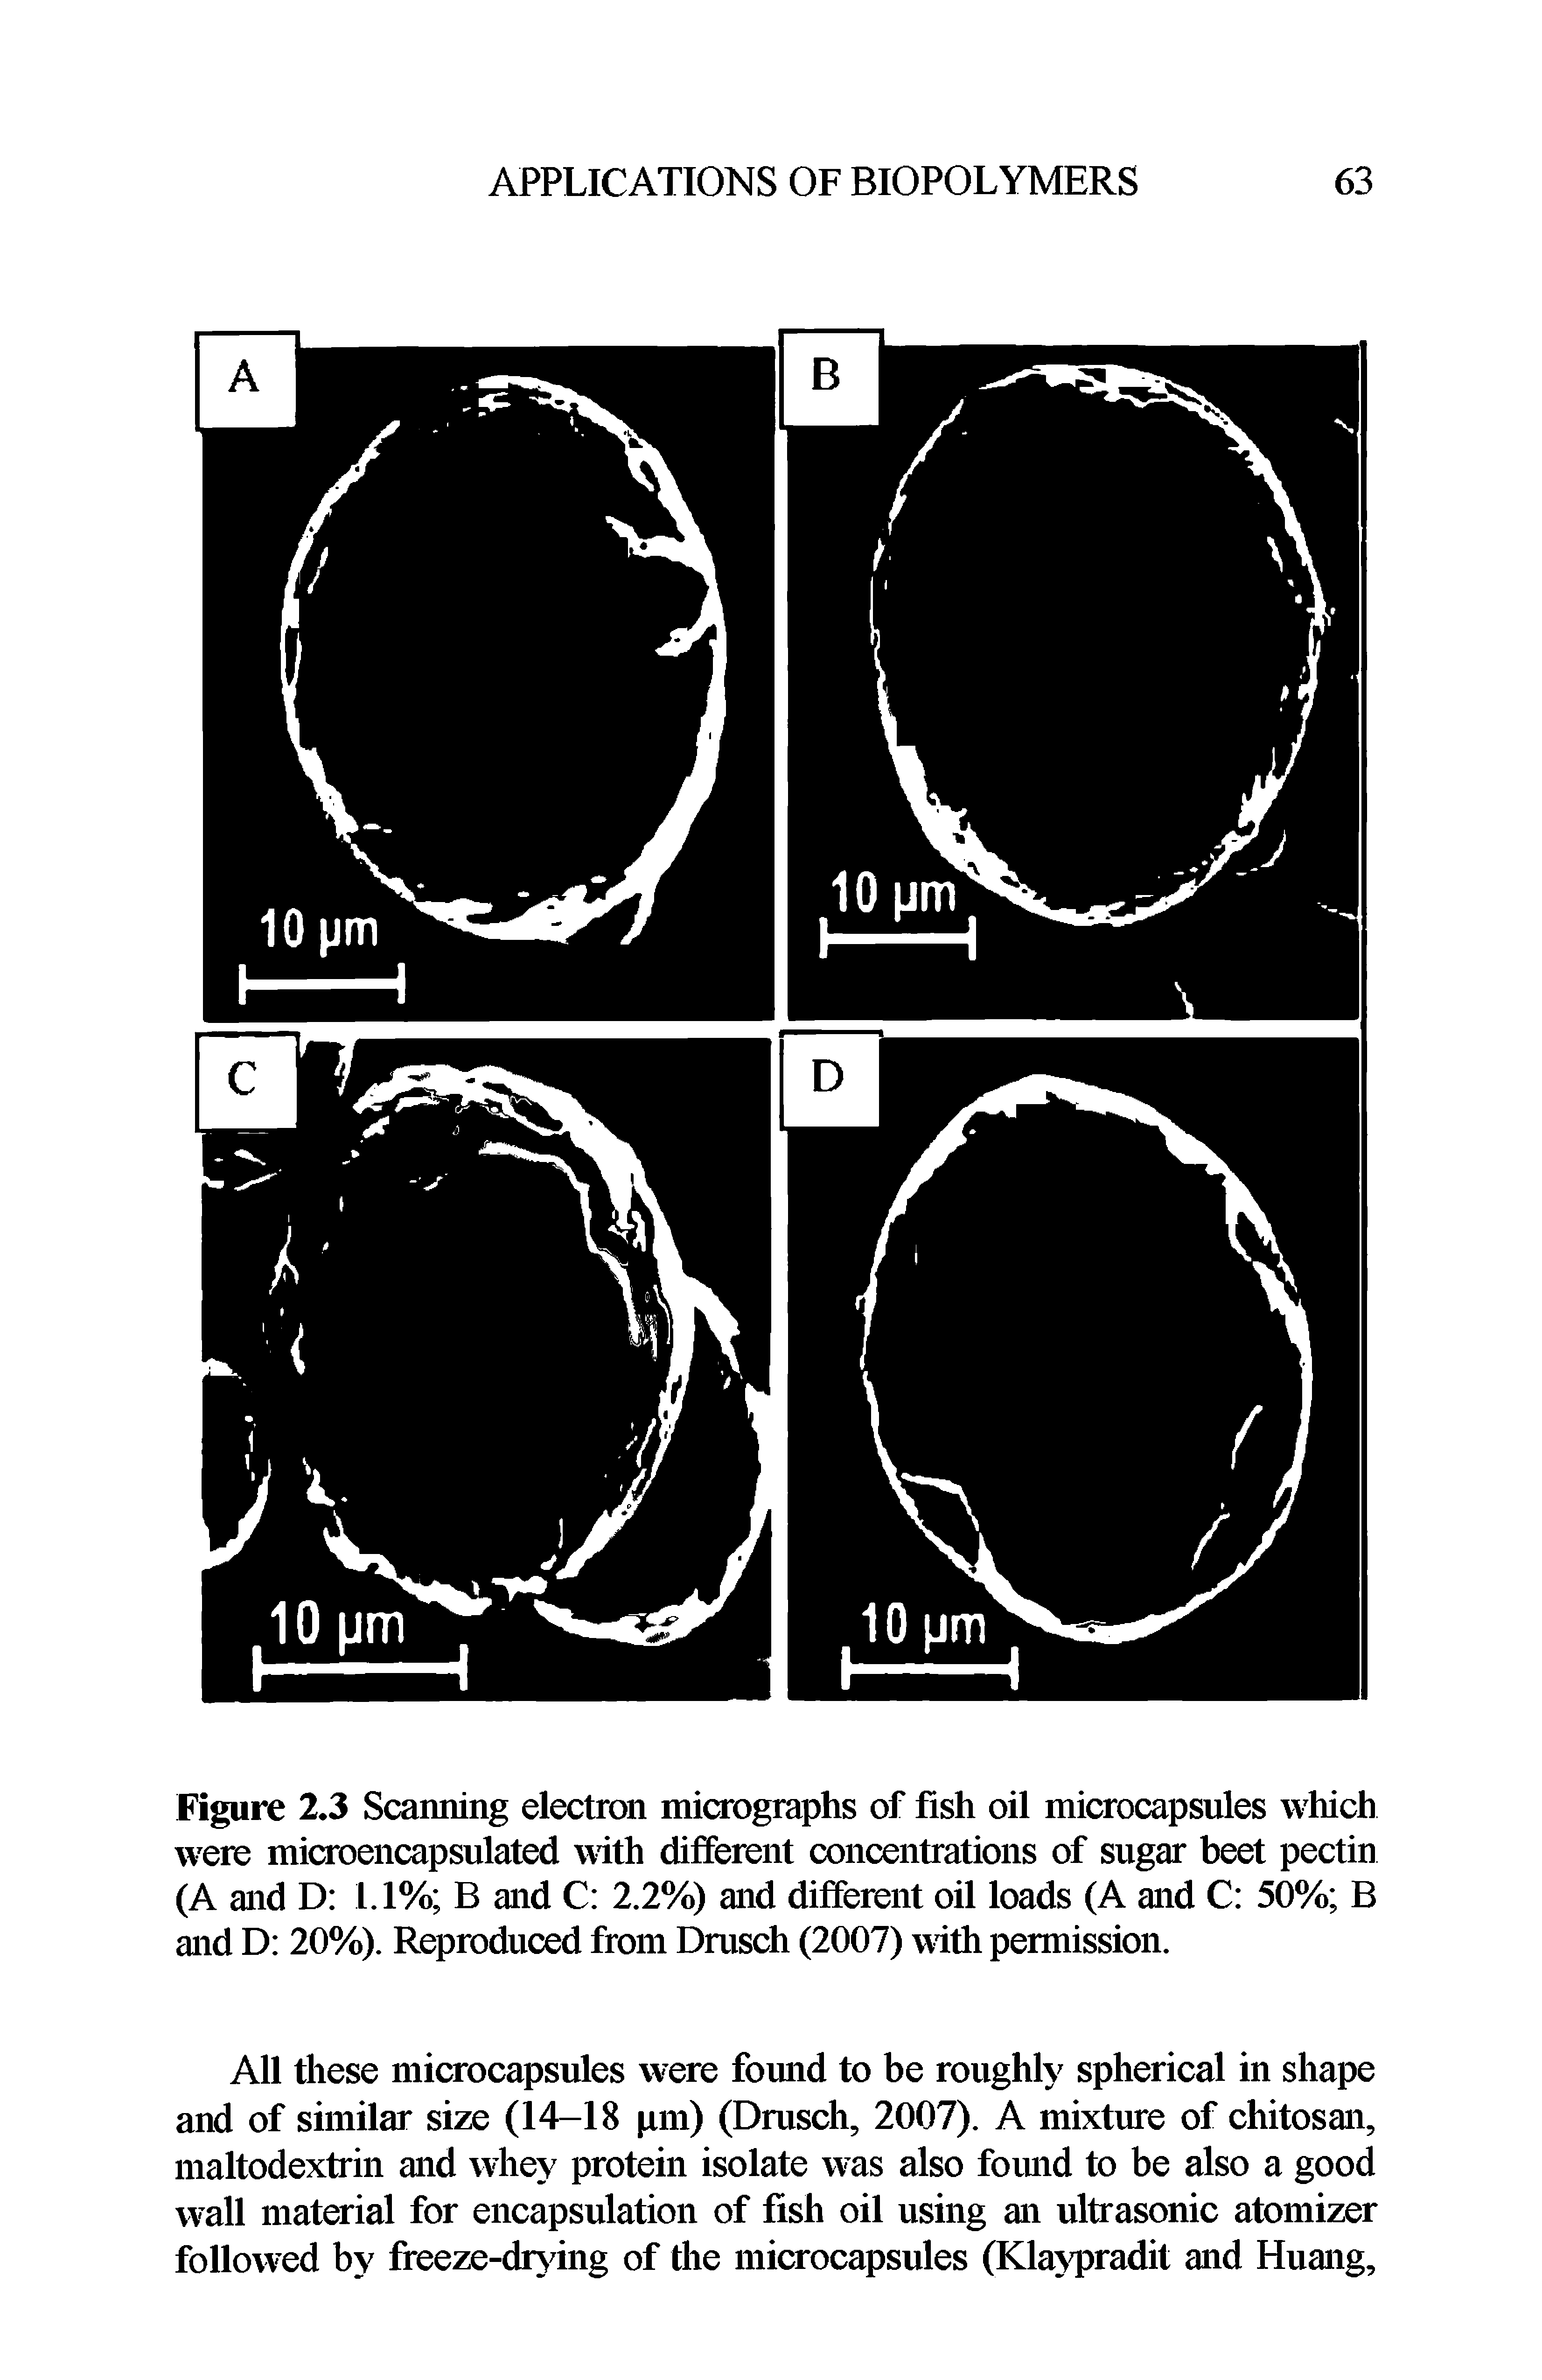 Figure 2.3 Scanning electron micrographs of fish oil microcapsules which were microencapsulated with different concentrations of sugar beet pectin (A and D 1.1% B and C 2.2%) and different oil loads (A and C 50% B and D 20%). Reproduced from Dmsch (2007) with permission.